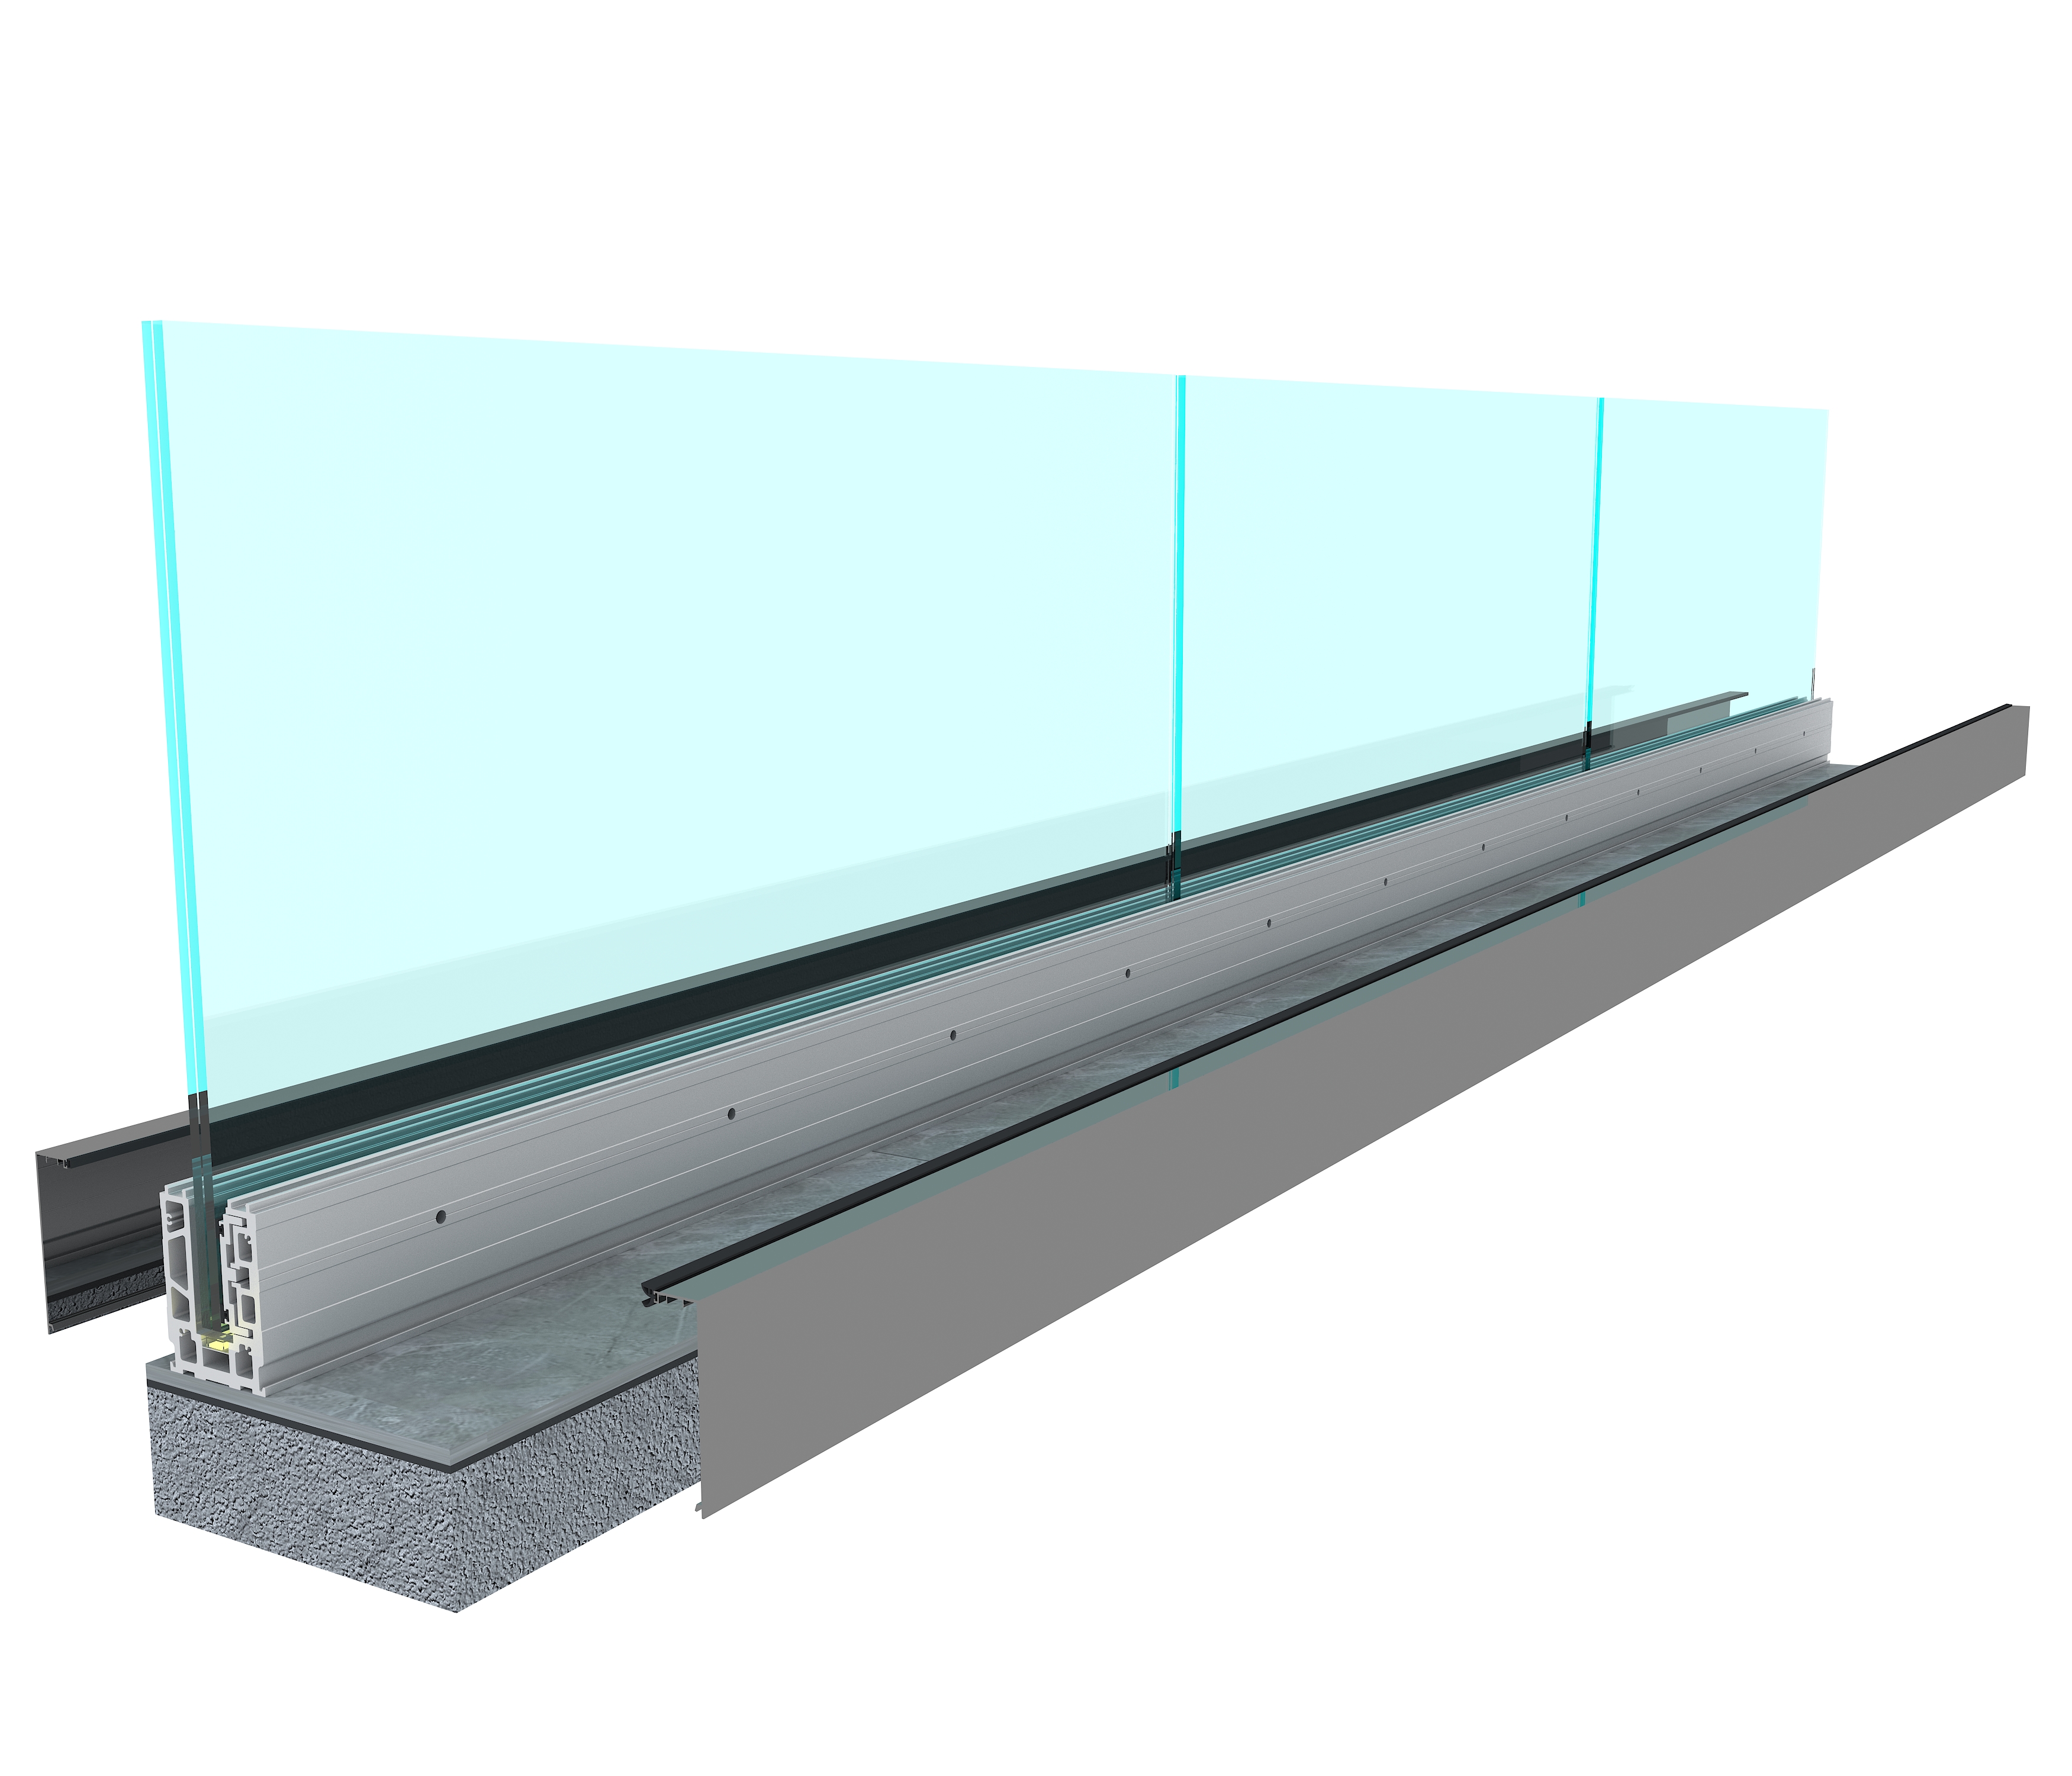 Linear continous application of On-floor All Glass Railing System